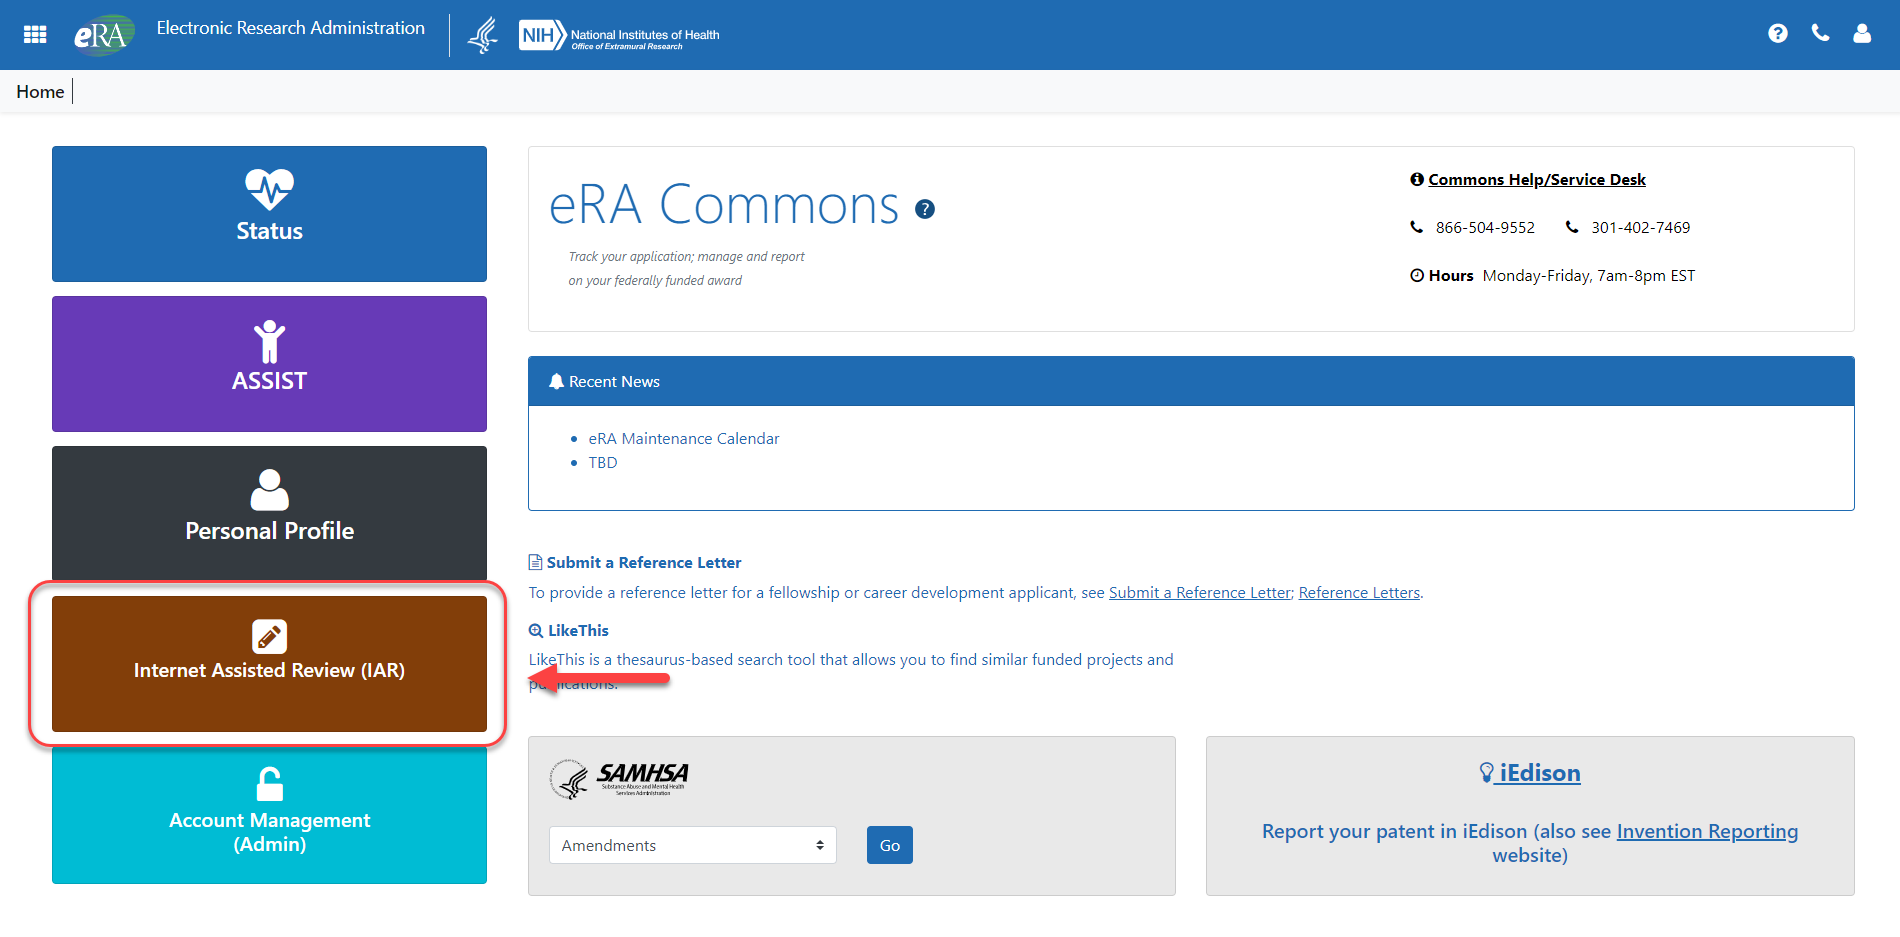 Internet Assisted Review button on the eRA Commons landing page